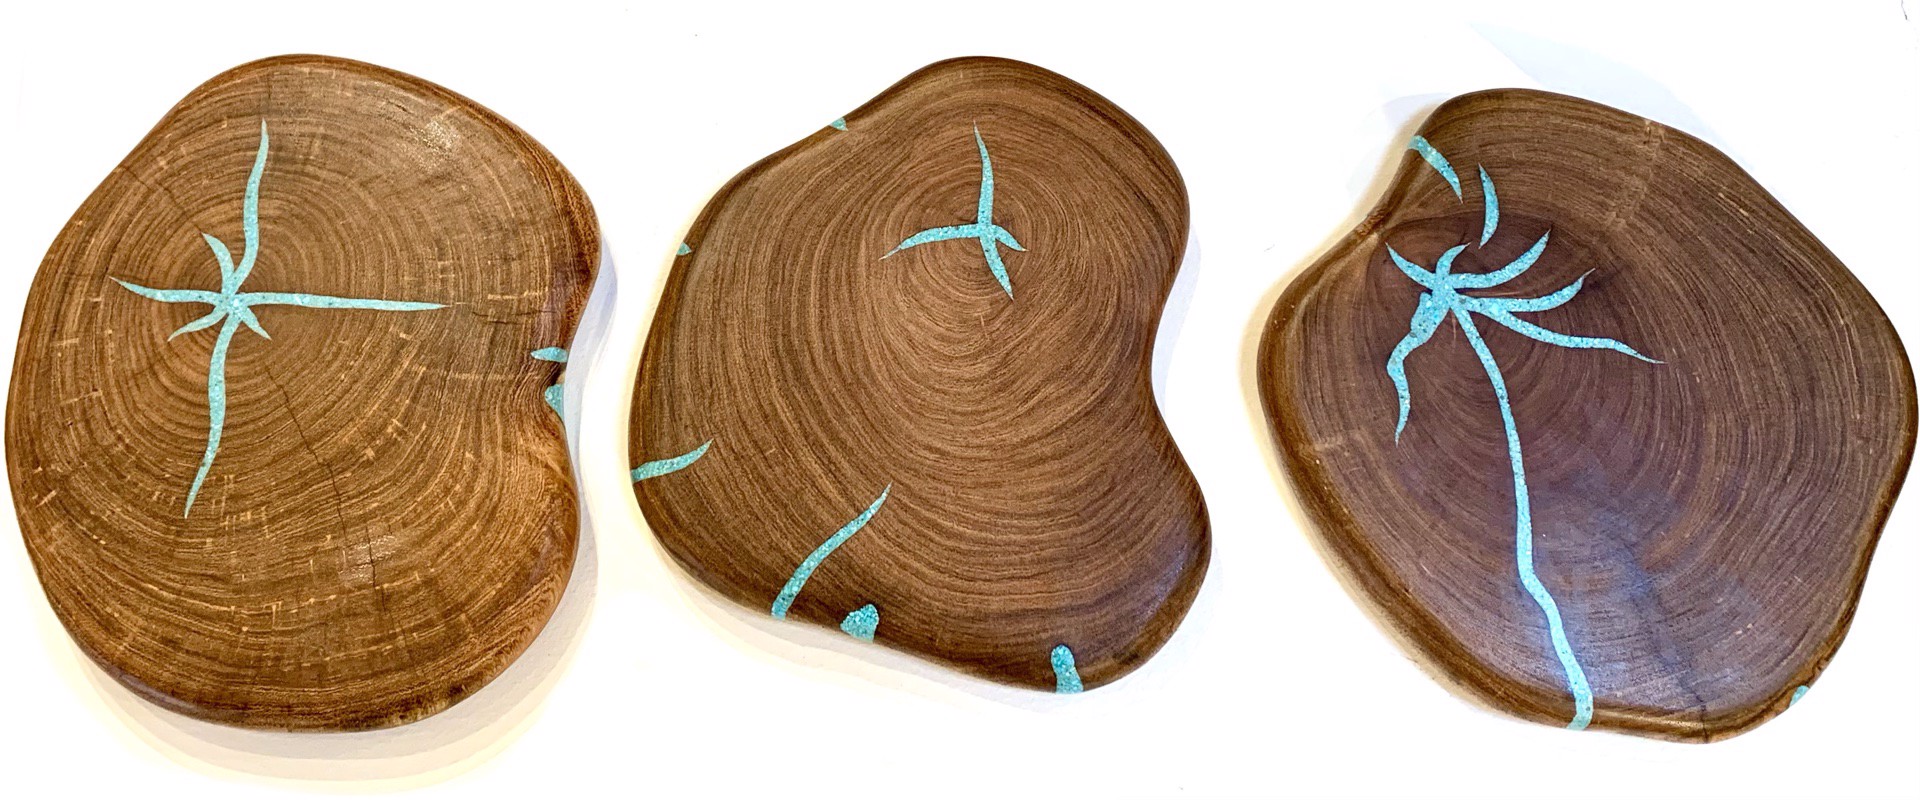 Rounds - Small Mesquite with Inlay, Assorted by TreeStump Woodcraft